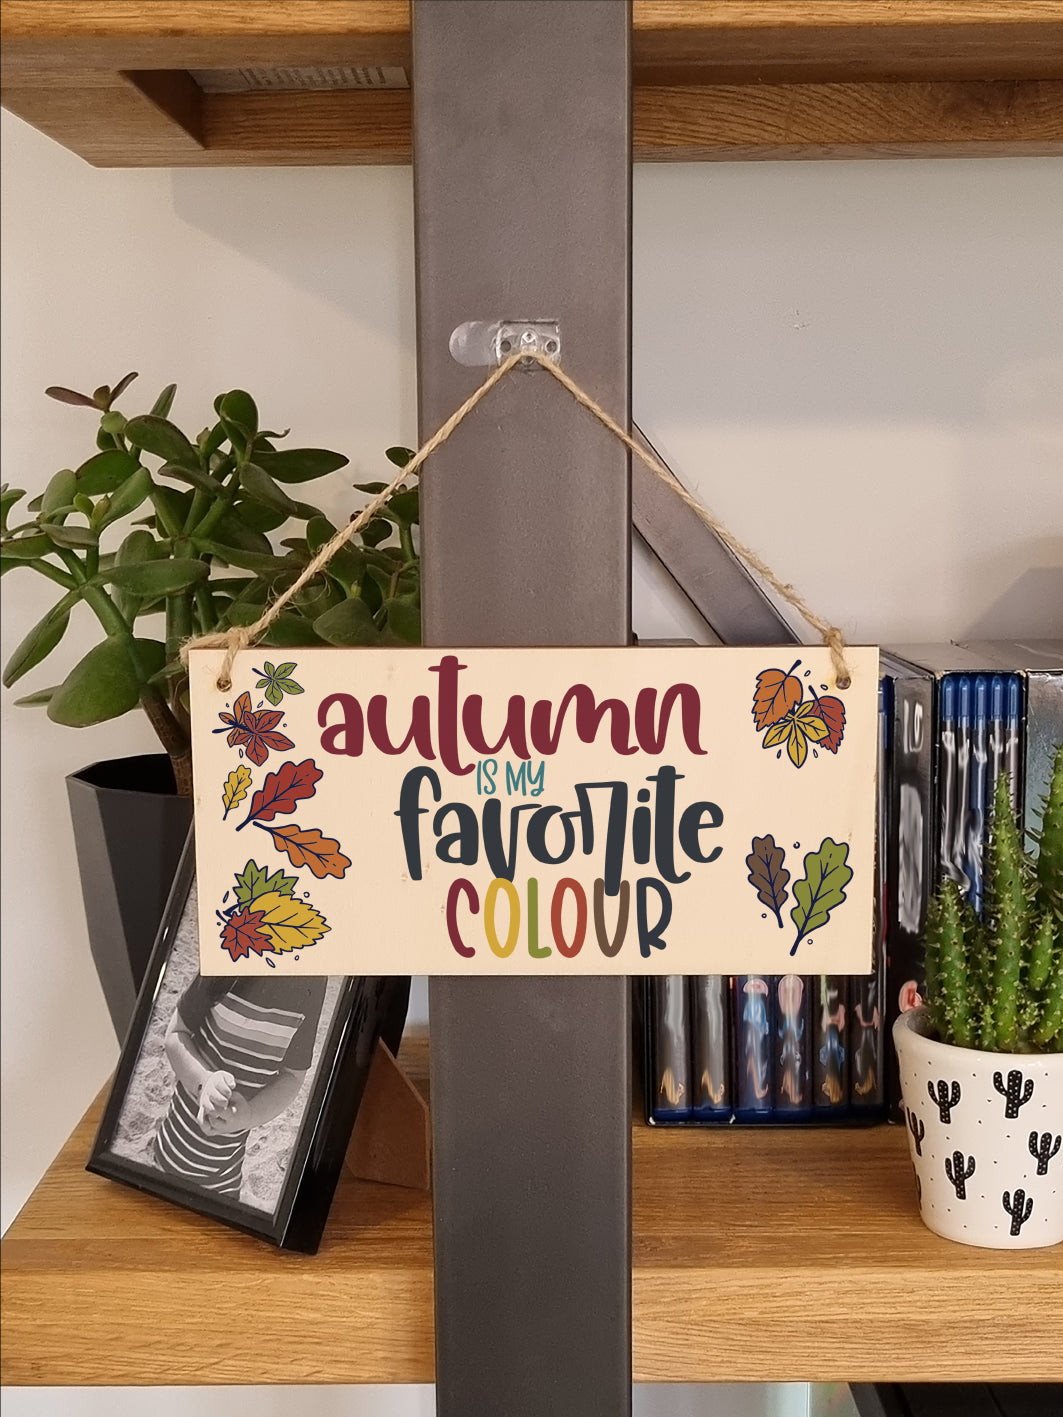 Autumn Favourite Colour Seasonal Decorative Leaves Sign Handmade Wooden Hanging Wall Plaque Gift Hallway Home Décor